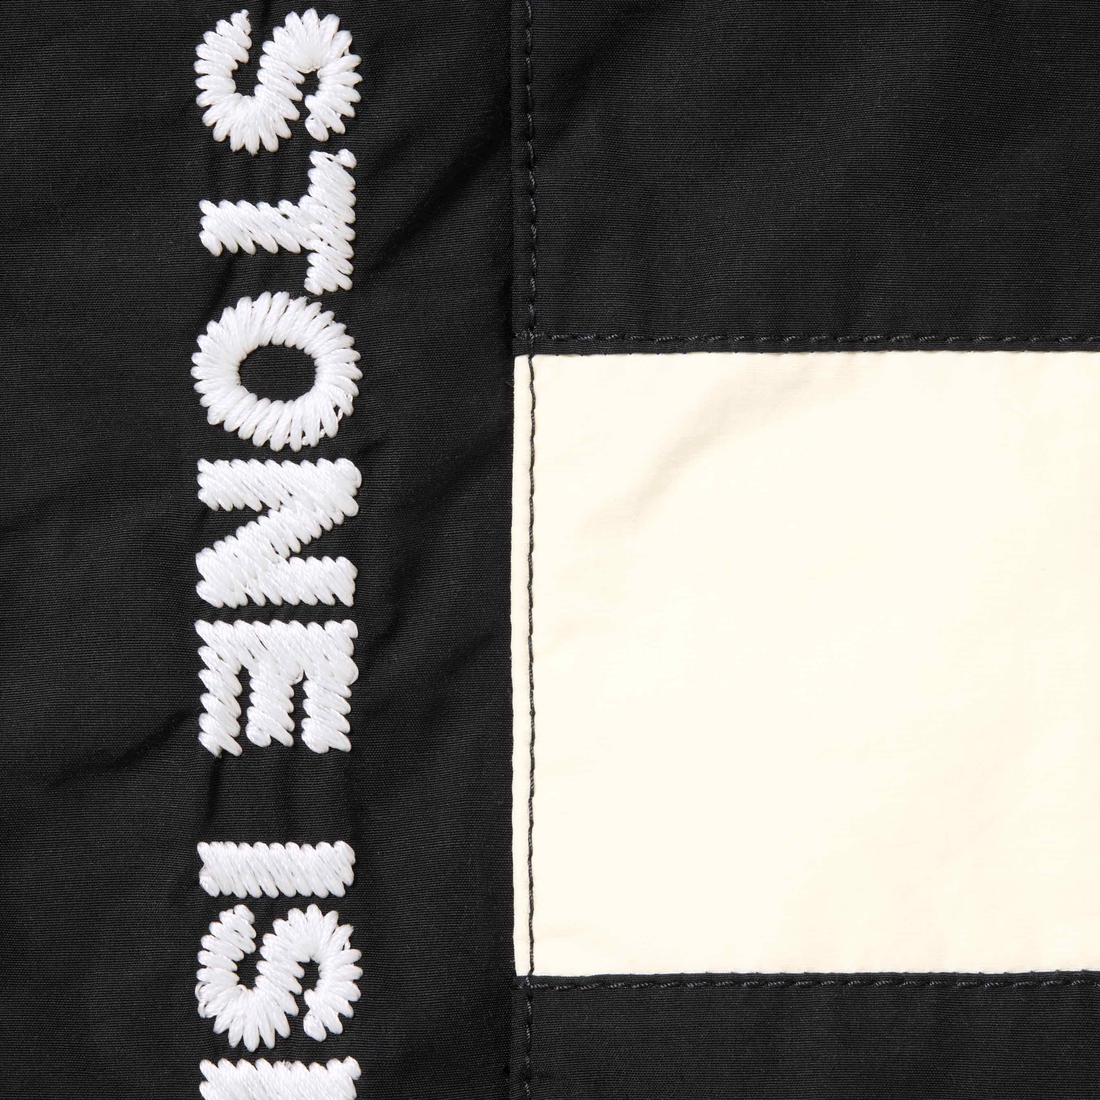 Details on Supreme Stone Island Reversible Down Puffer Jacket Black from fall winter
                                                    2023 (Price is $998)